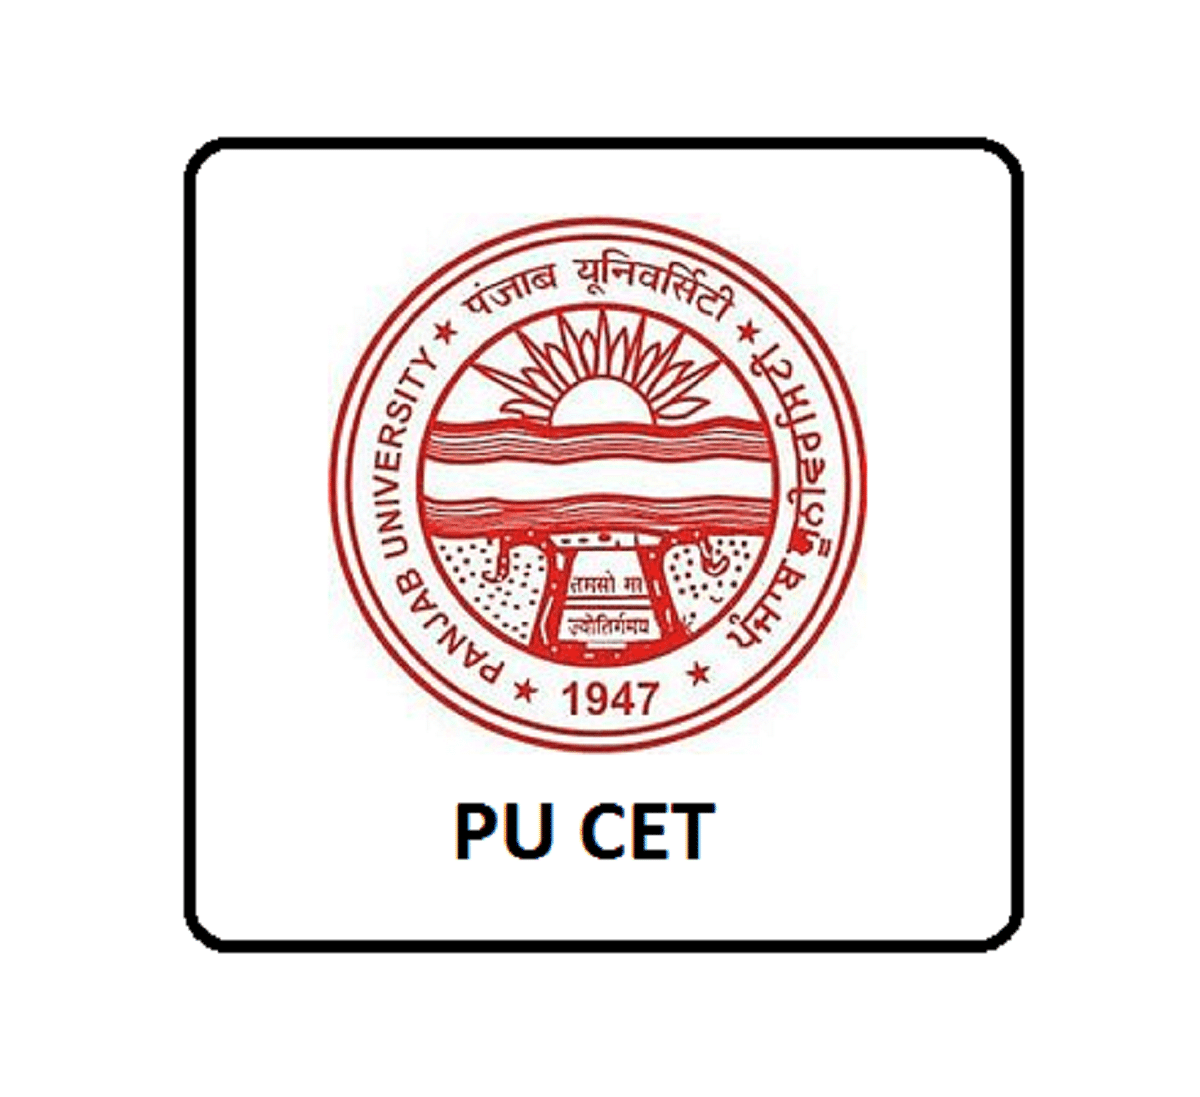 PU CET 2020: Application Window Opened Upto May 4, Check Exam Date & Pattern Here